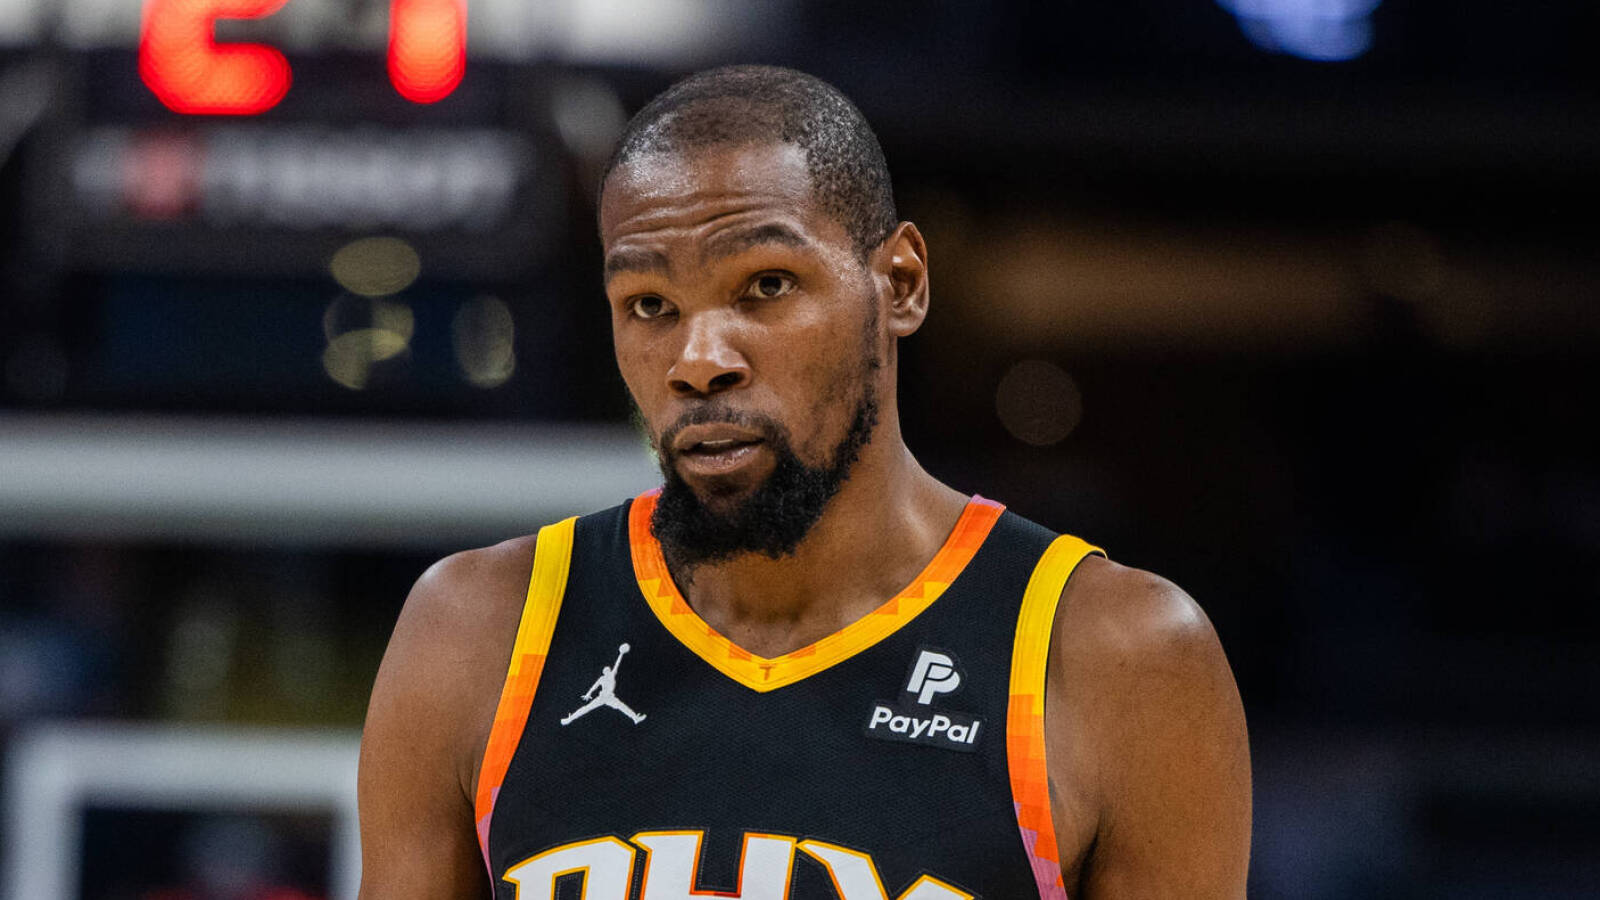 Kevin Durant reaches 28,000 points in fewer games than LeBron James